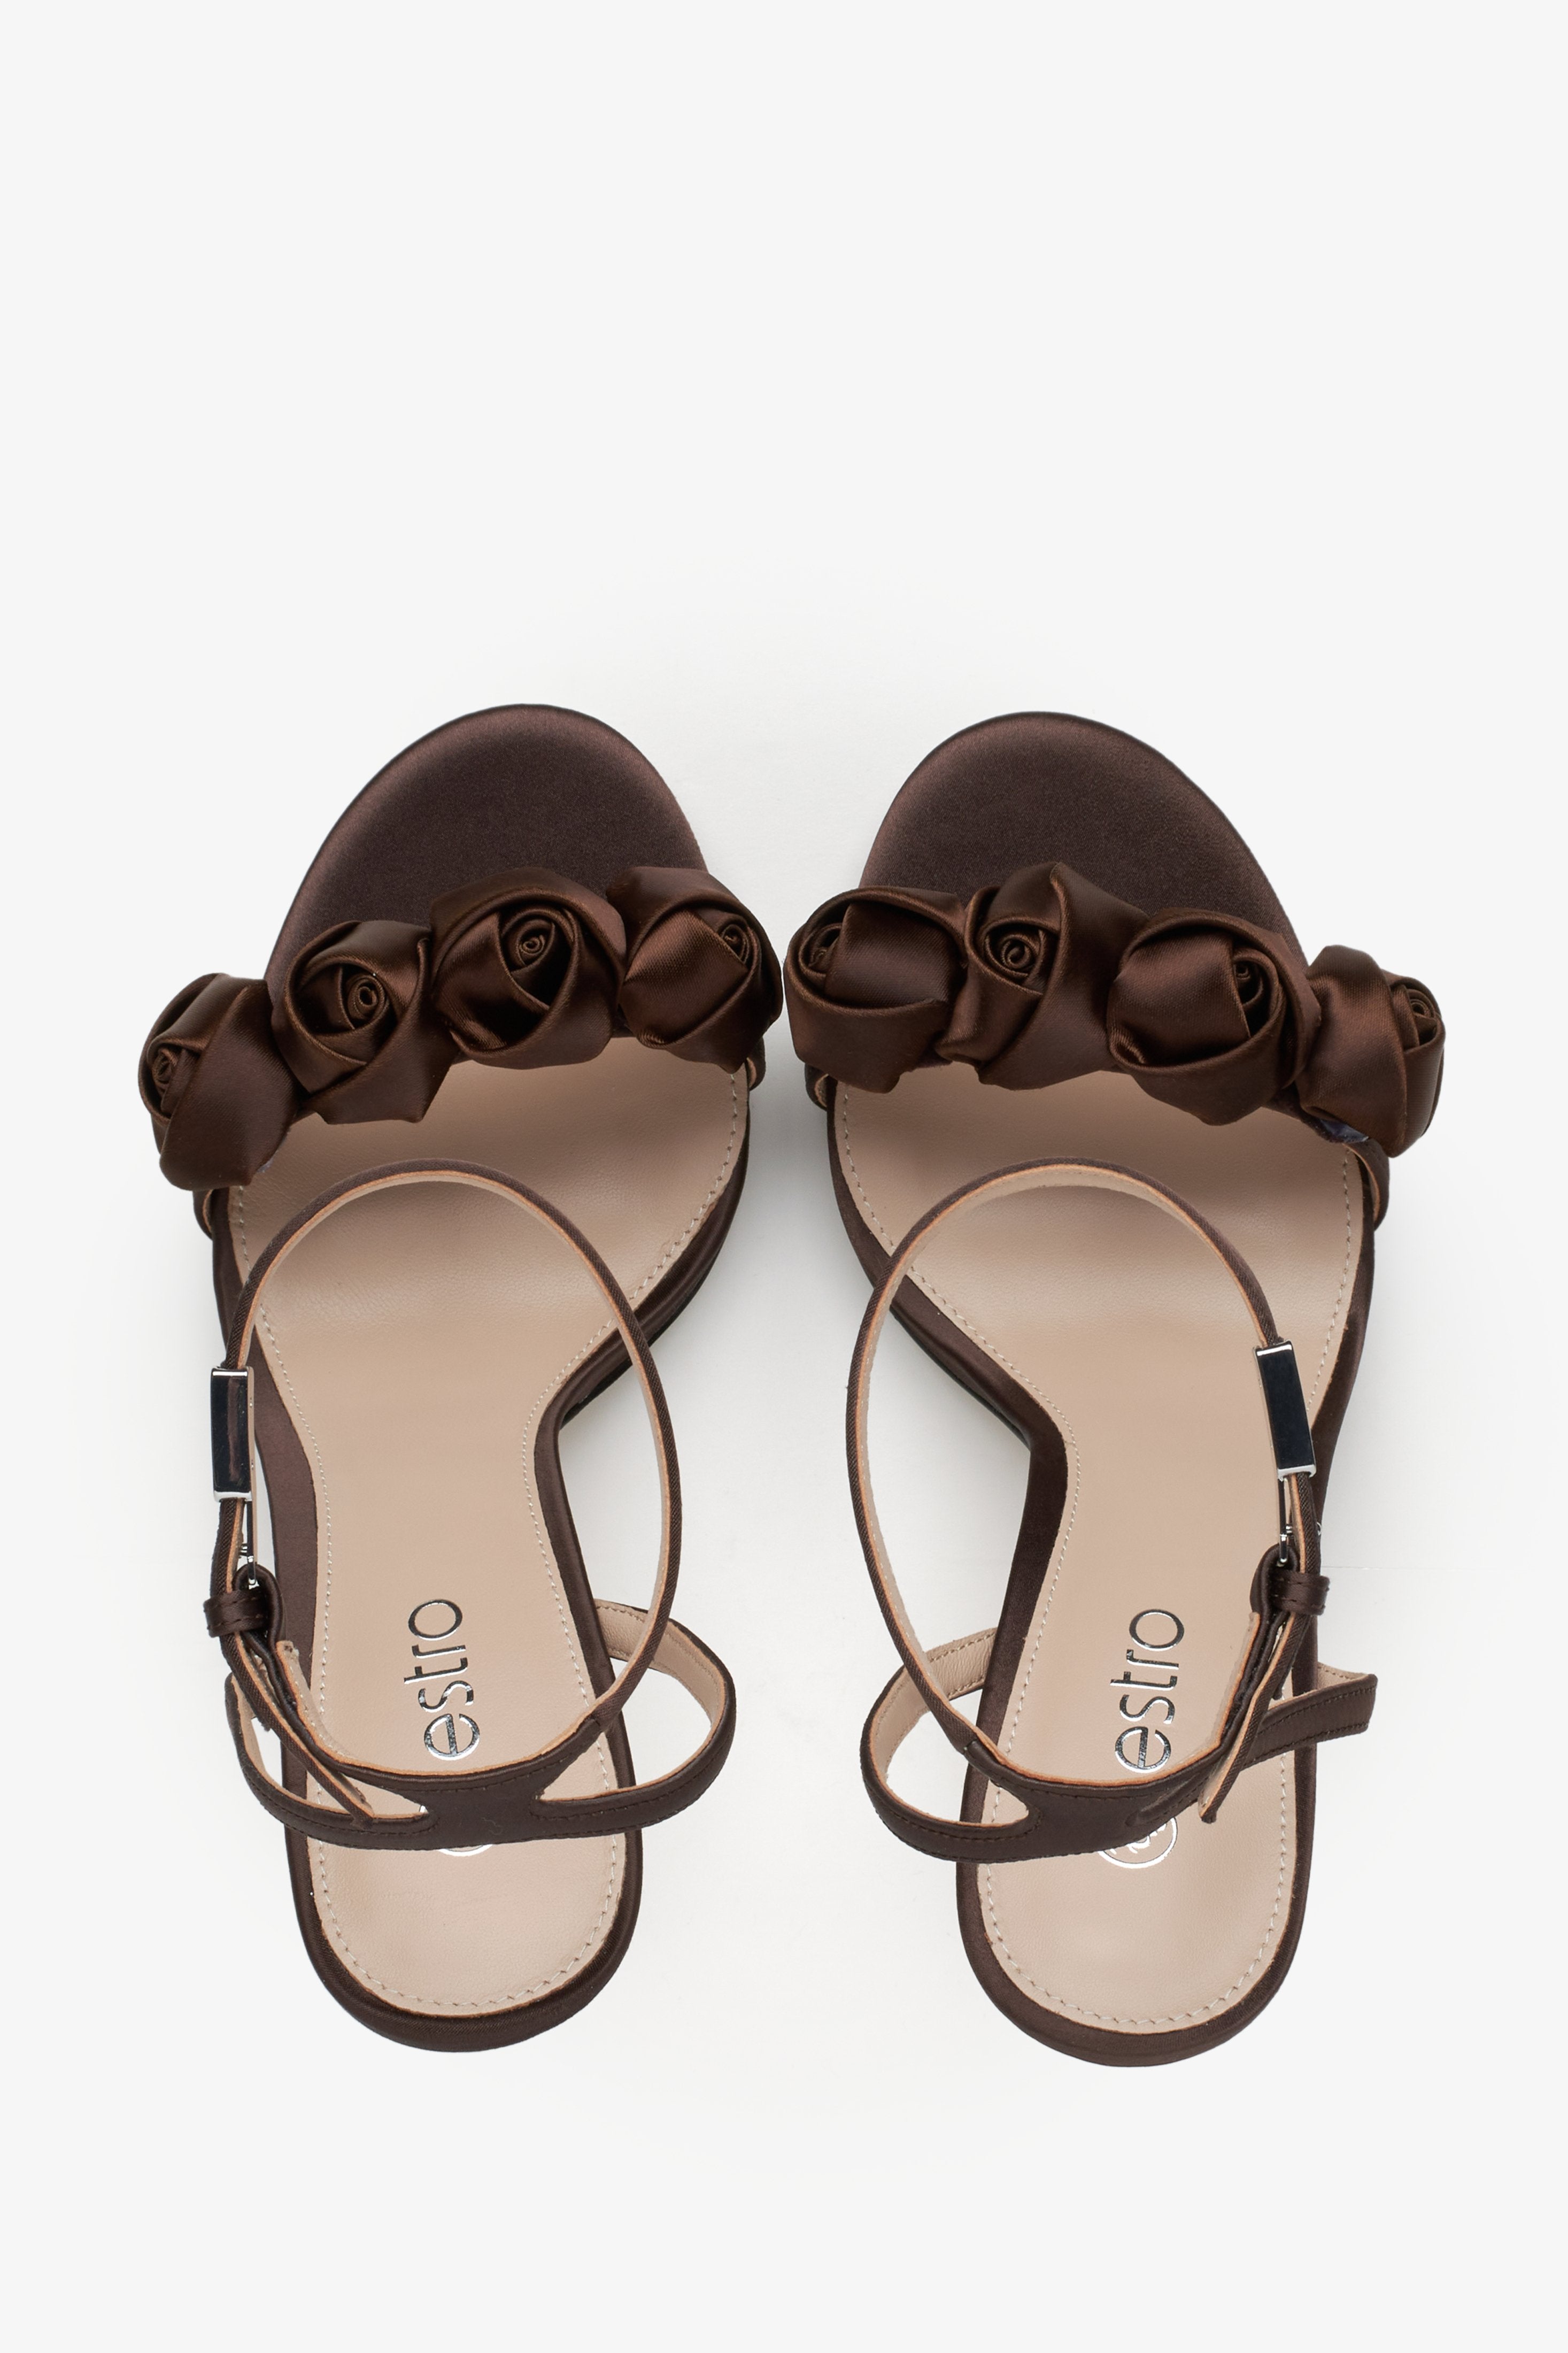 Women's dark brown sandals with floral ornamented heels - top view presentation.